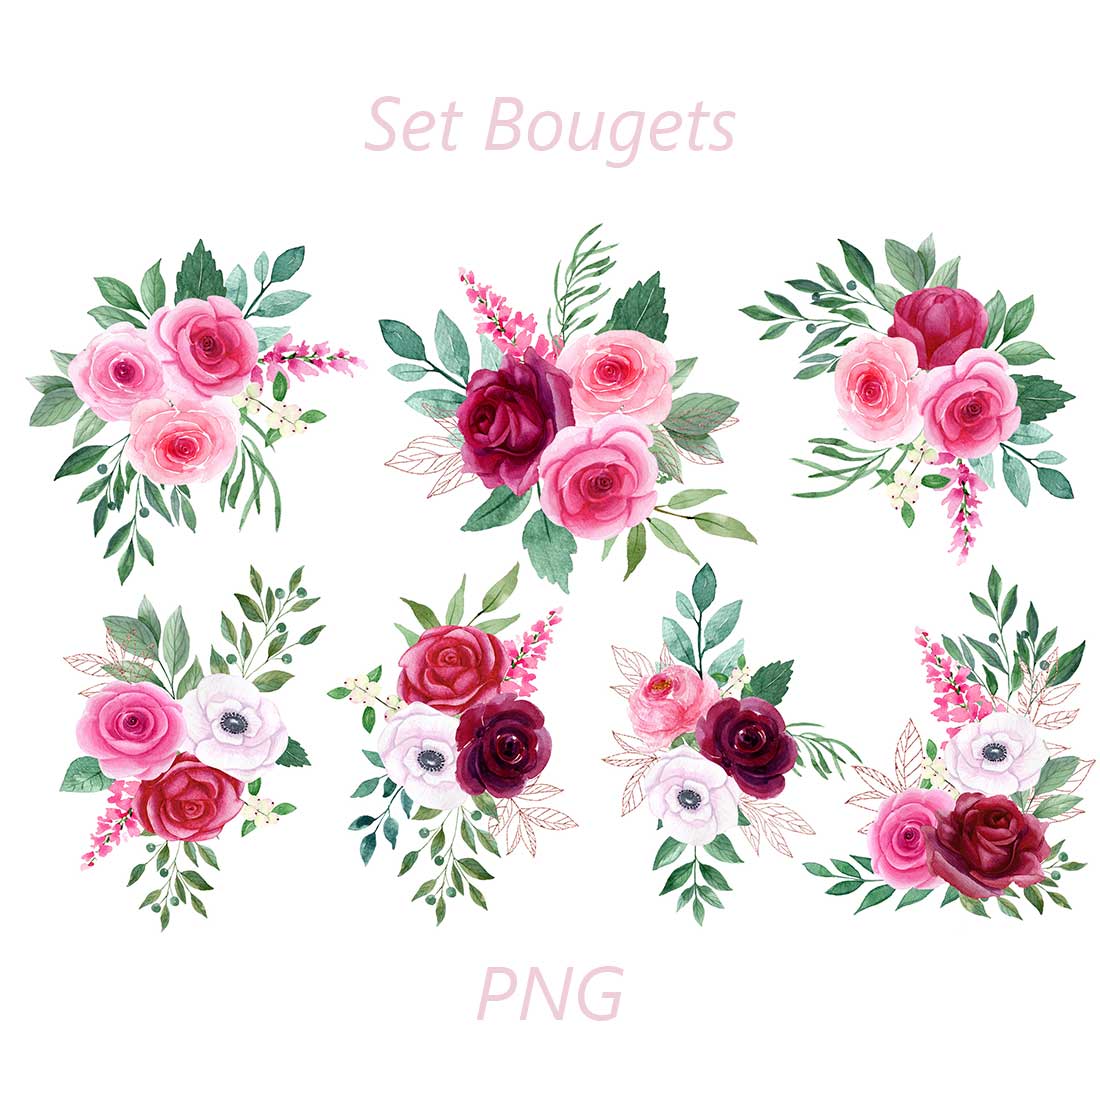 Set of Numbers and Letters with Watercolor Flowers, flower arrangements.